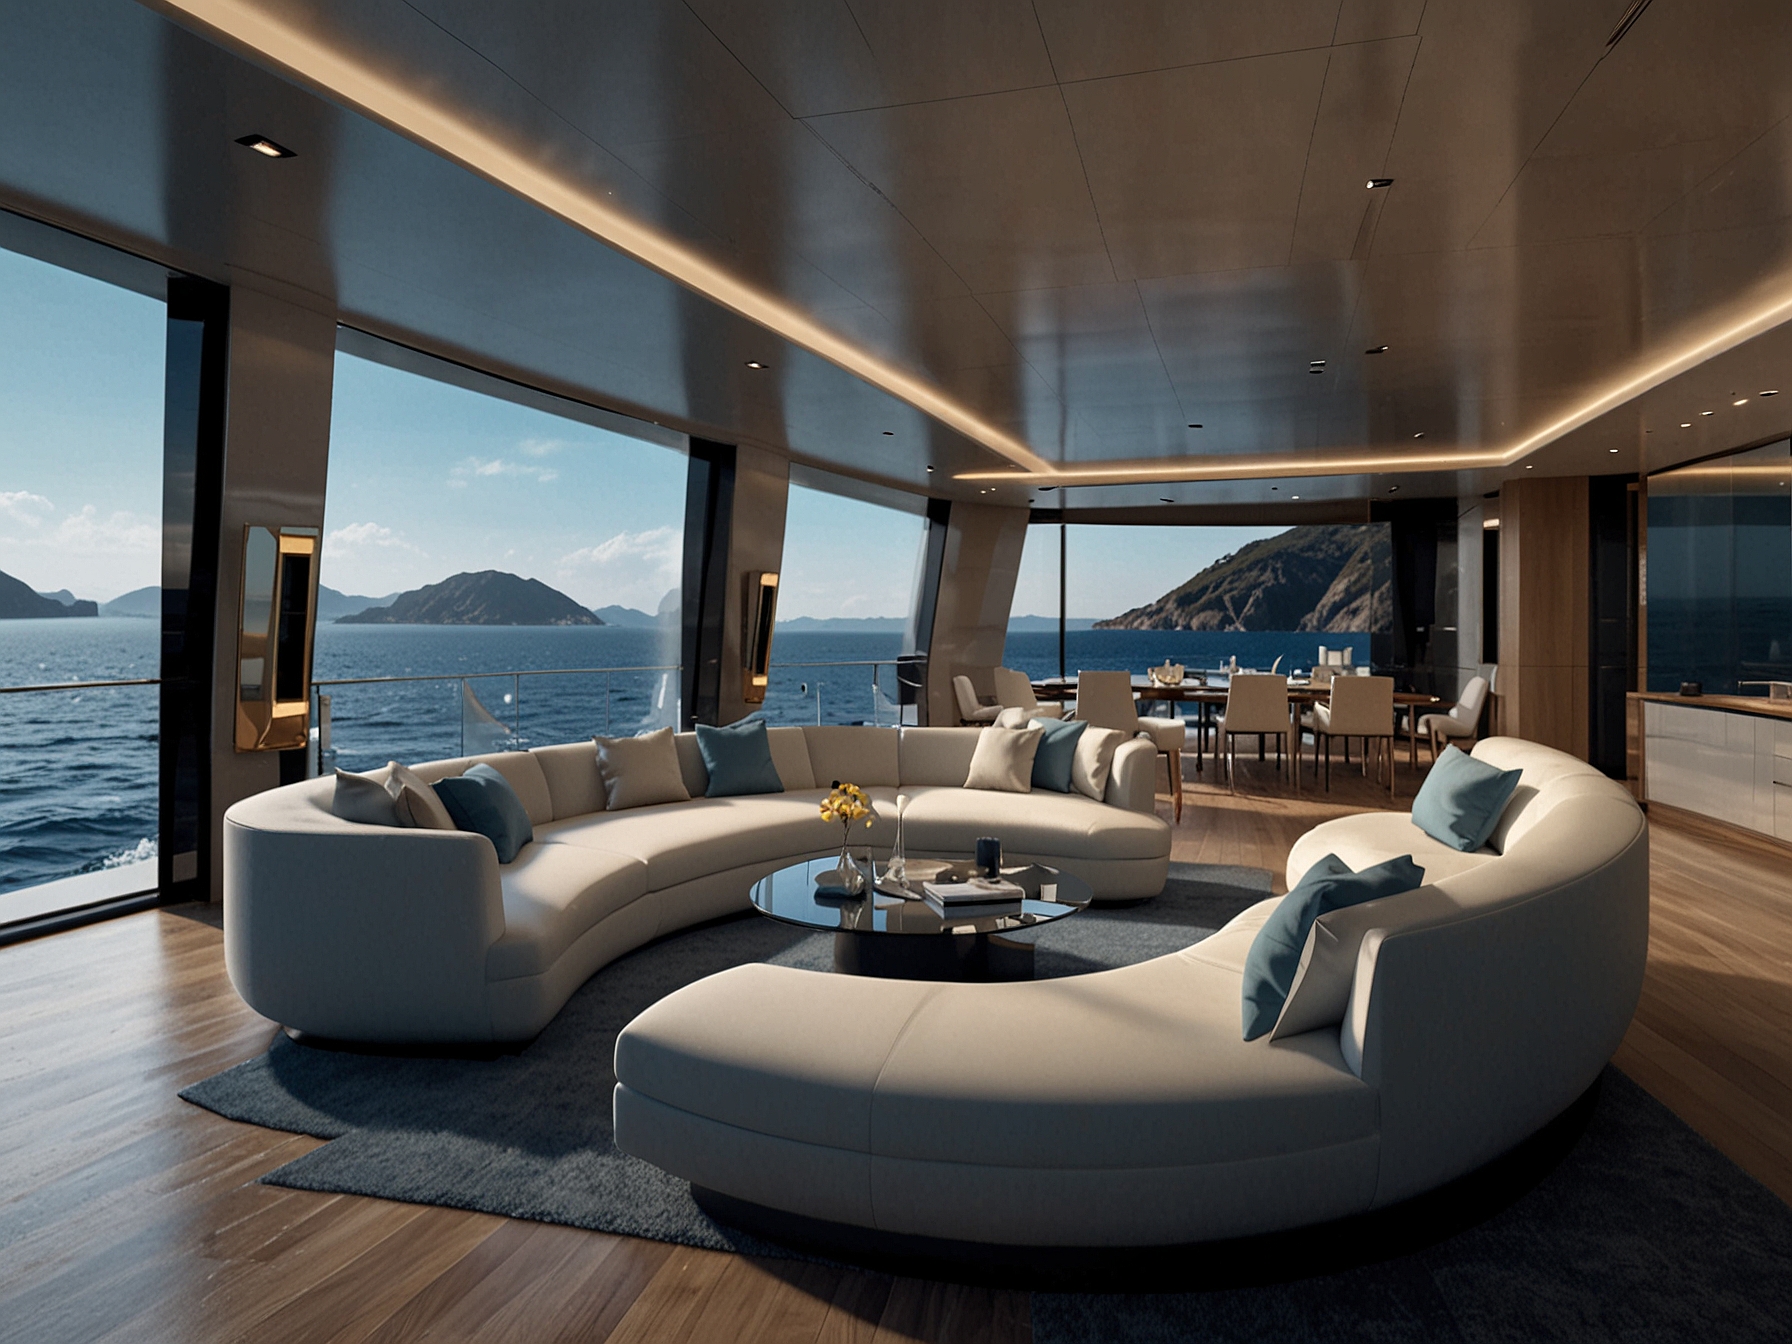 An exterior view of the Bluephire 34 superyacht cruising at sea, highlighting its sleek lines, minimalist design, and expansive glass salon that offers panoramic ocean views.